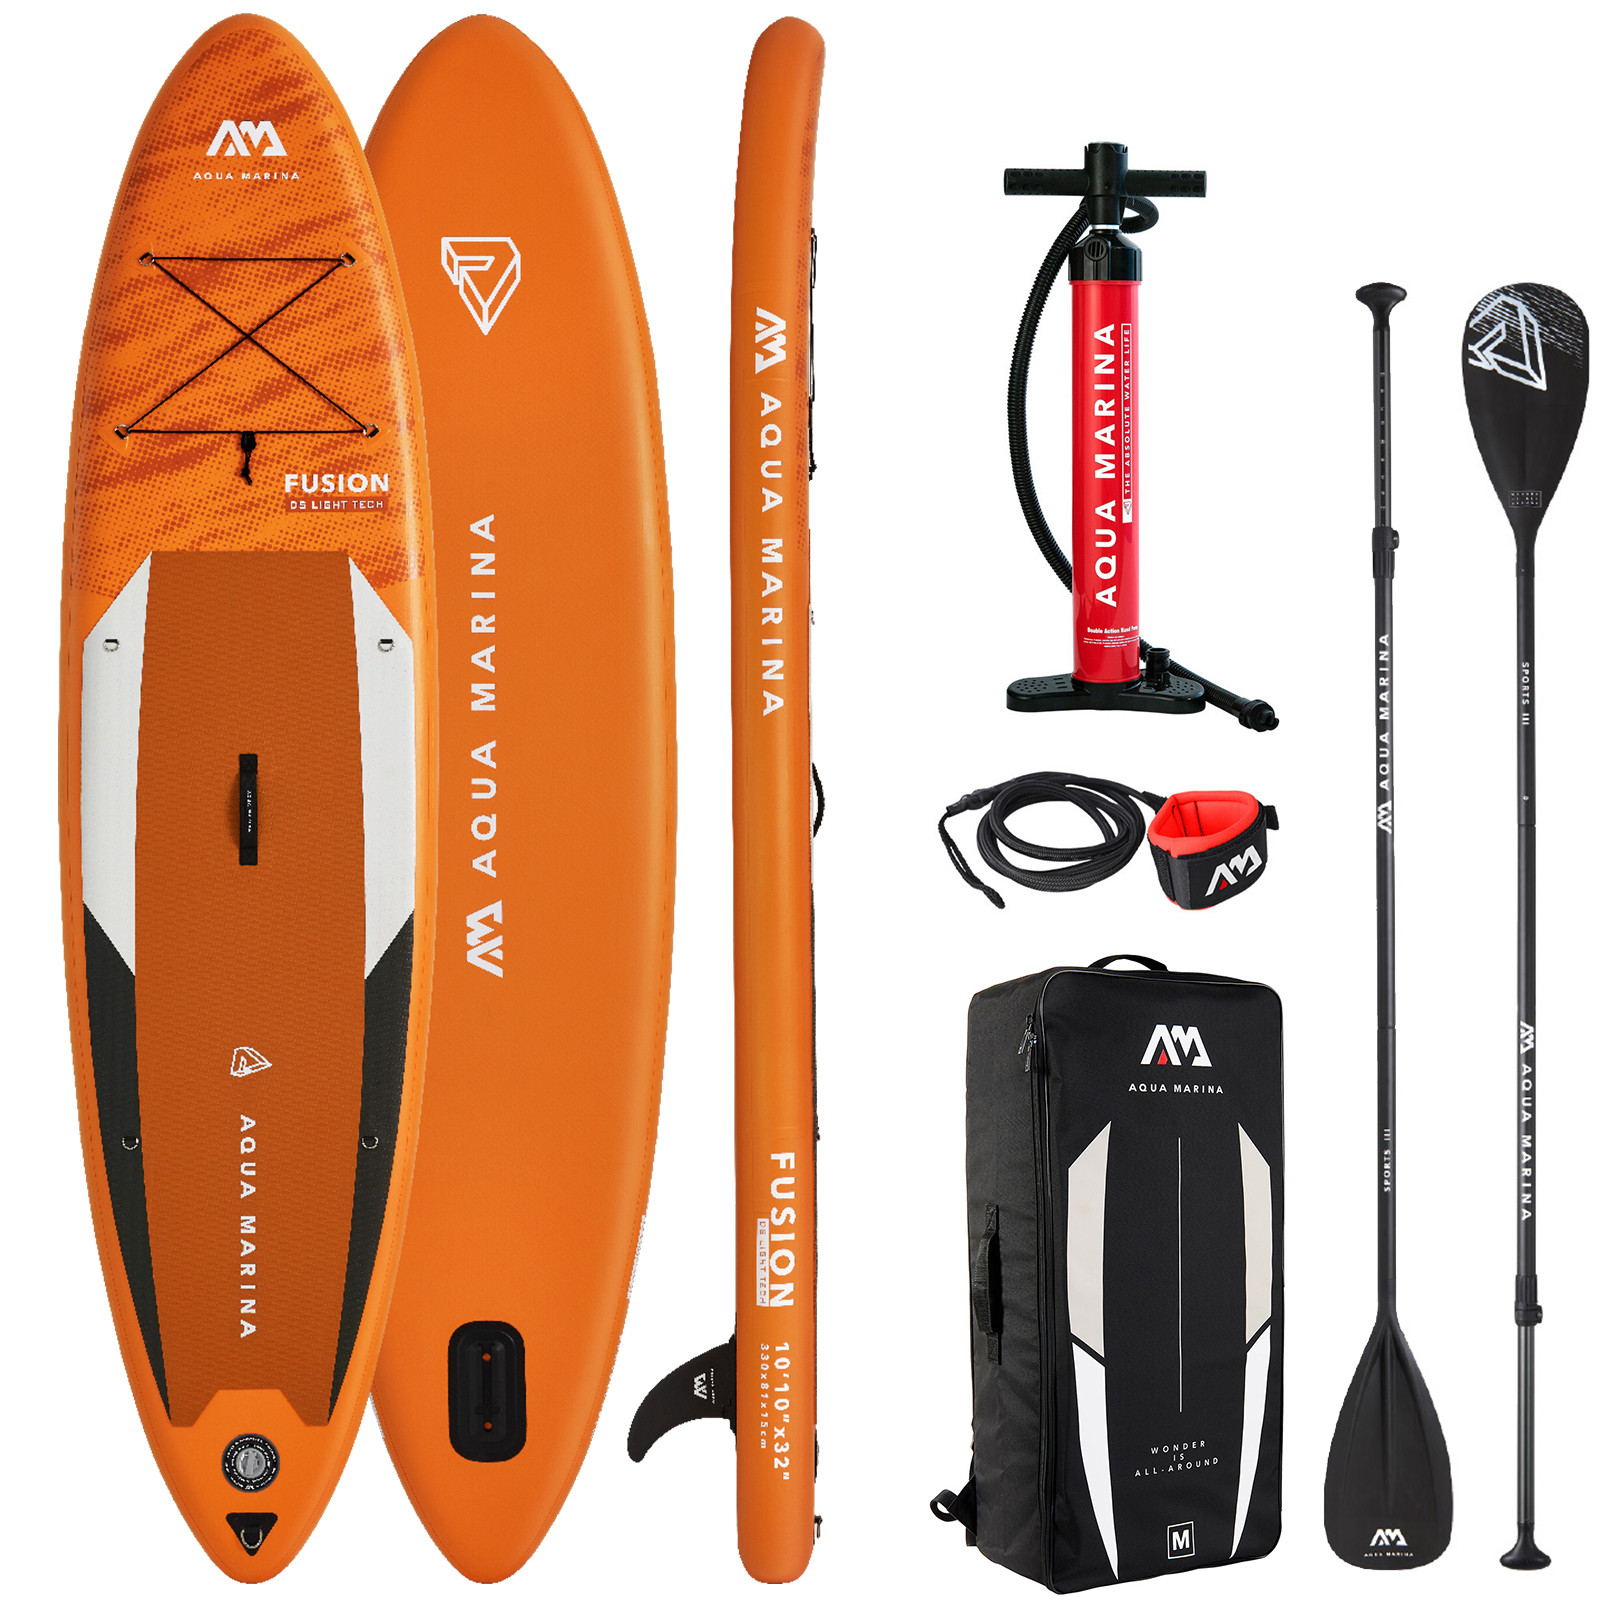 Saga perzik Horizontaal 5 of the Best Stand Up Paddleboards 2021 | Outsider.ie